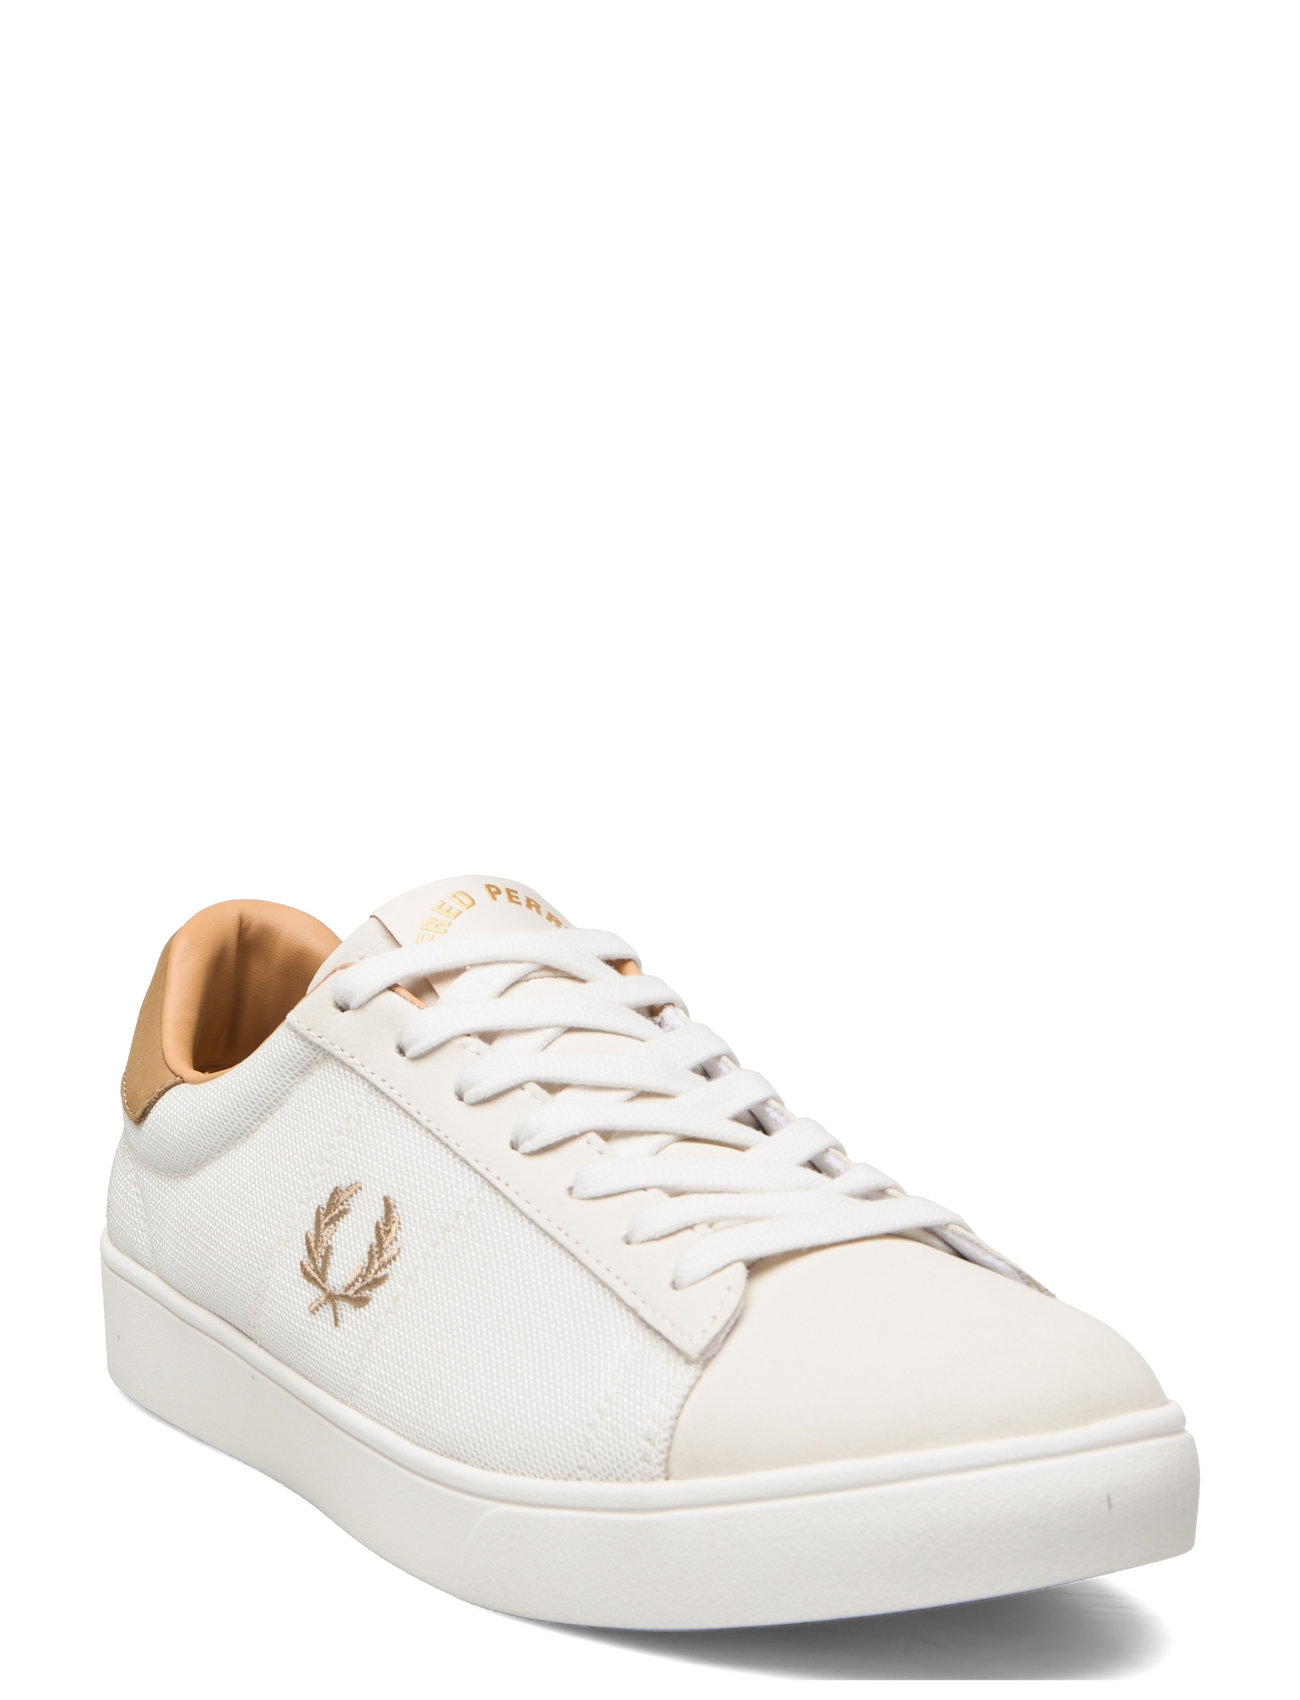 Fred Spencer - Lave sneakers - Boozt.com